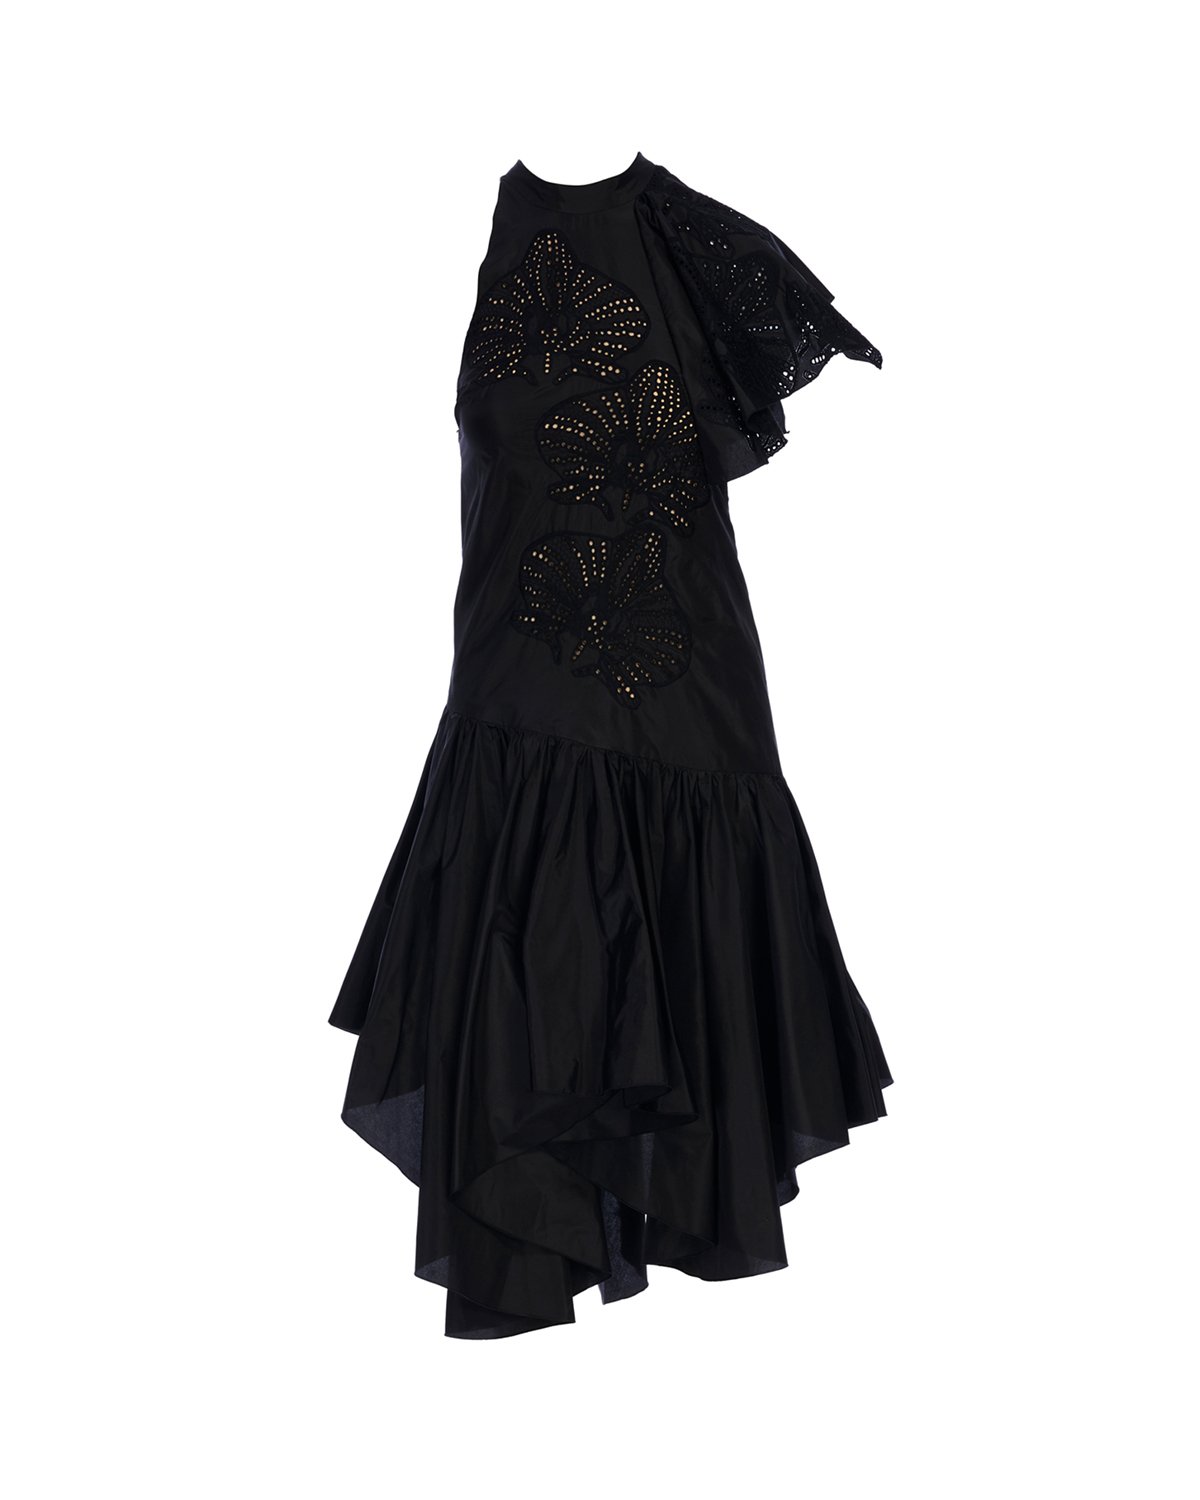 Black silk taffeta dress with orchid embroidery | Temporary Flash Sale | Genny